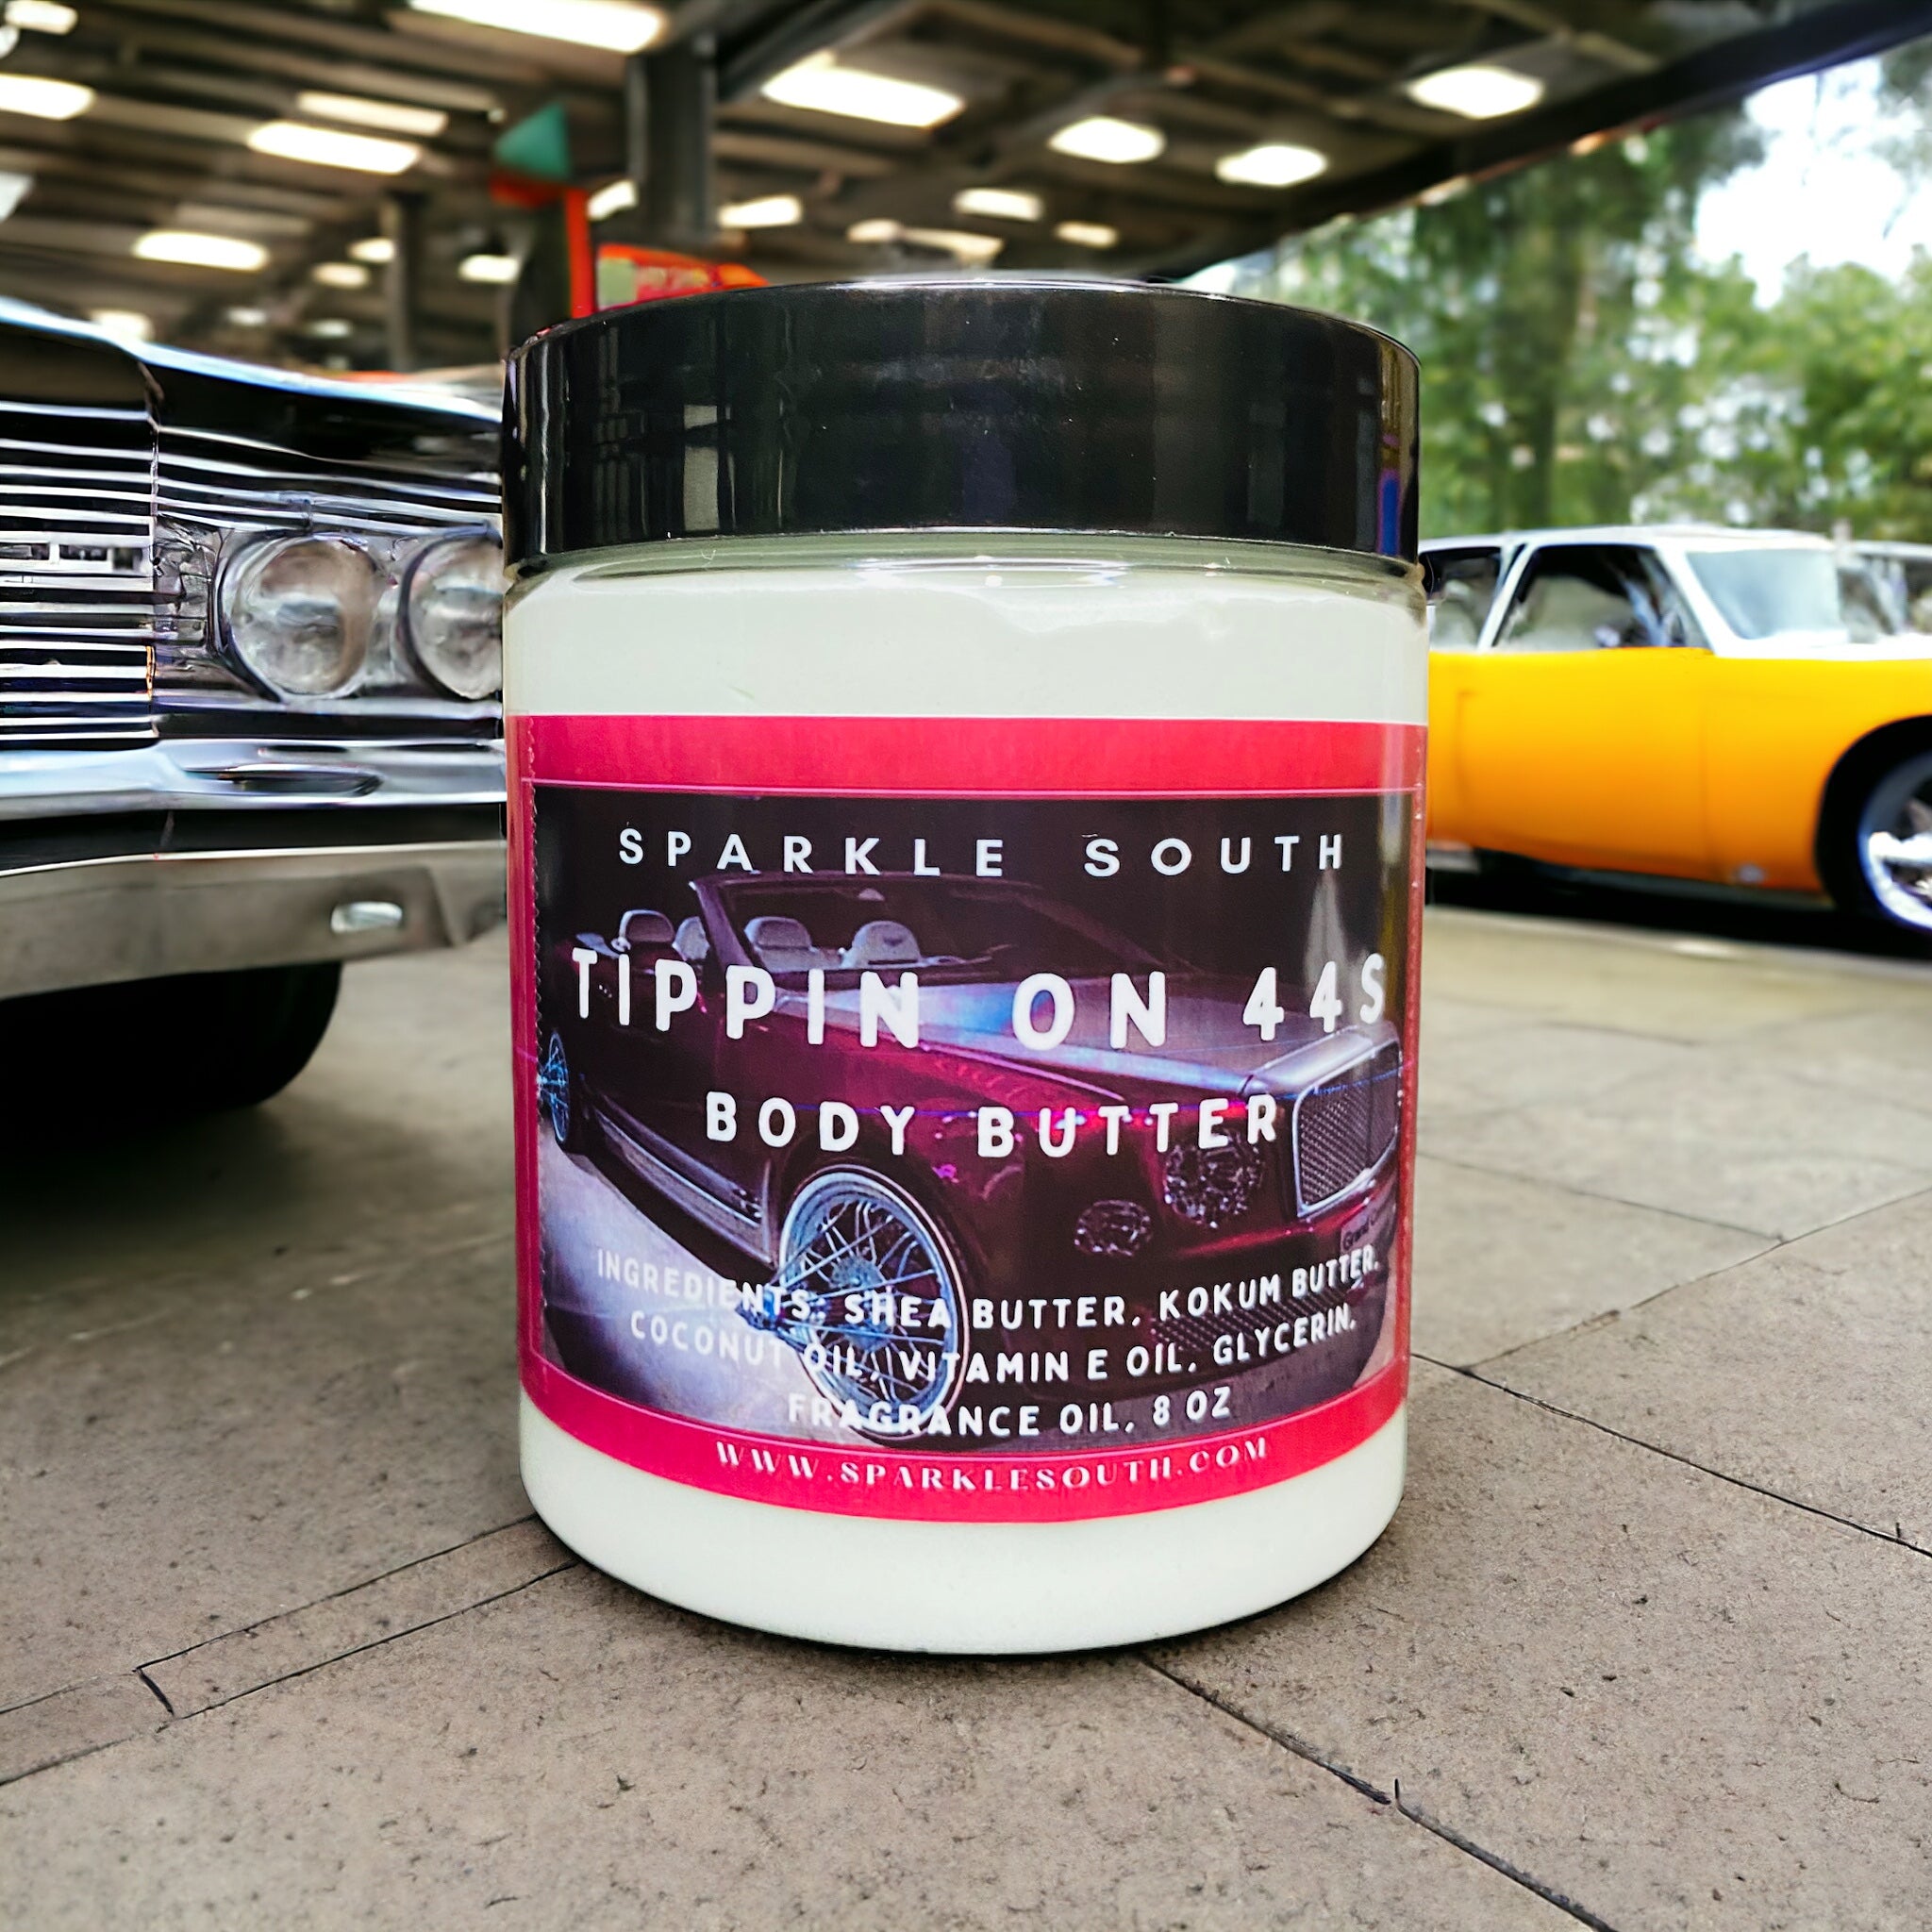 Tippin on 44s Body Butter